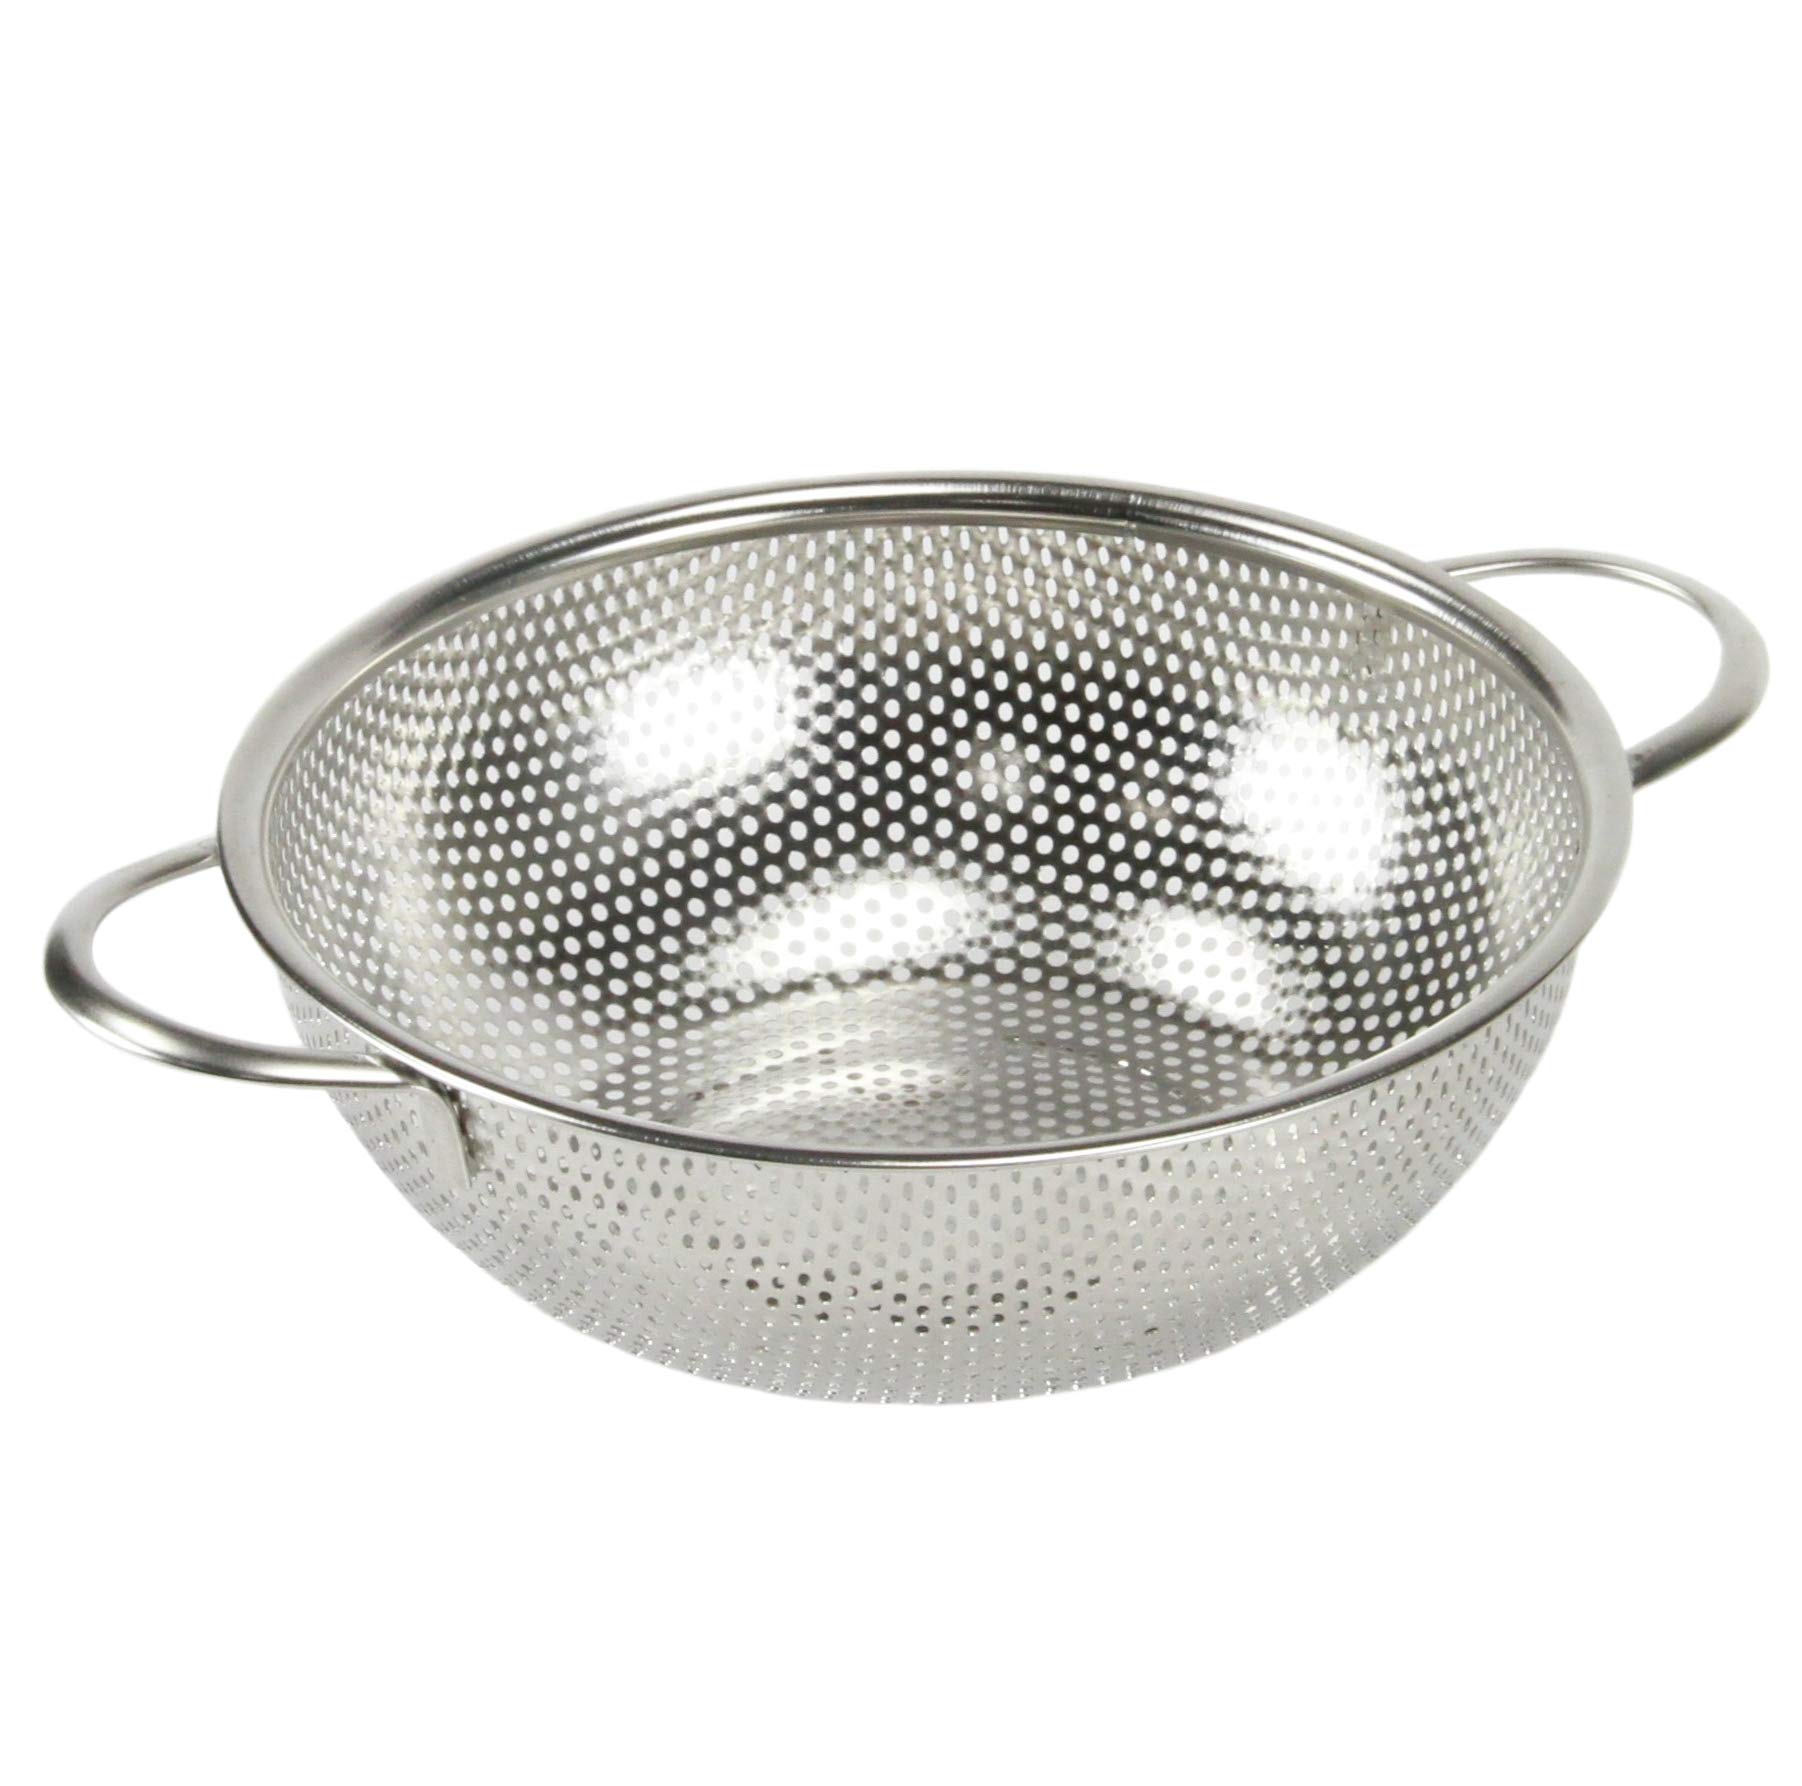 ''Chef CRAFT Select Micro-Perforated Colander, 1.5 Quart, Stainless Steel''